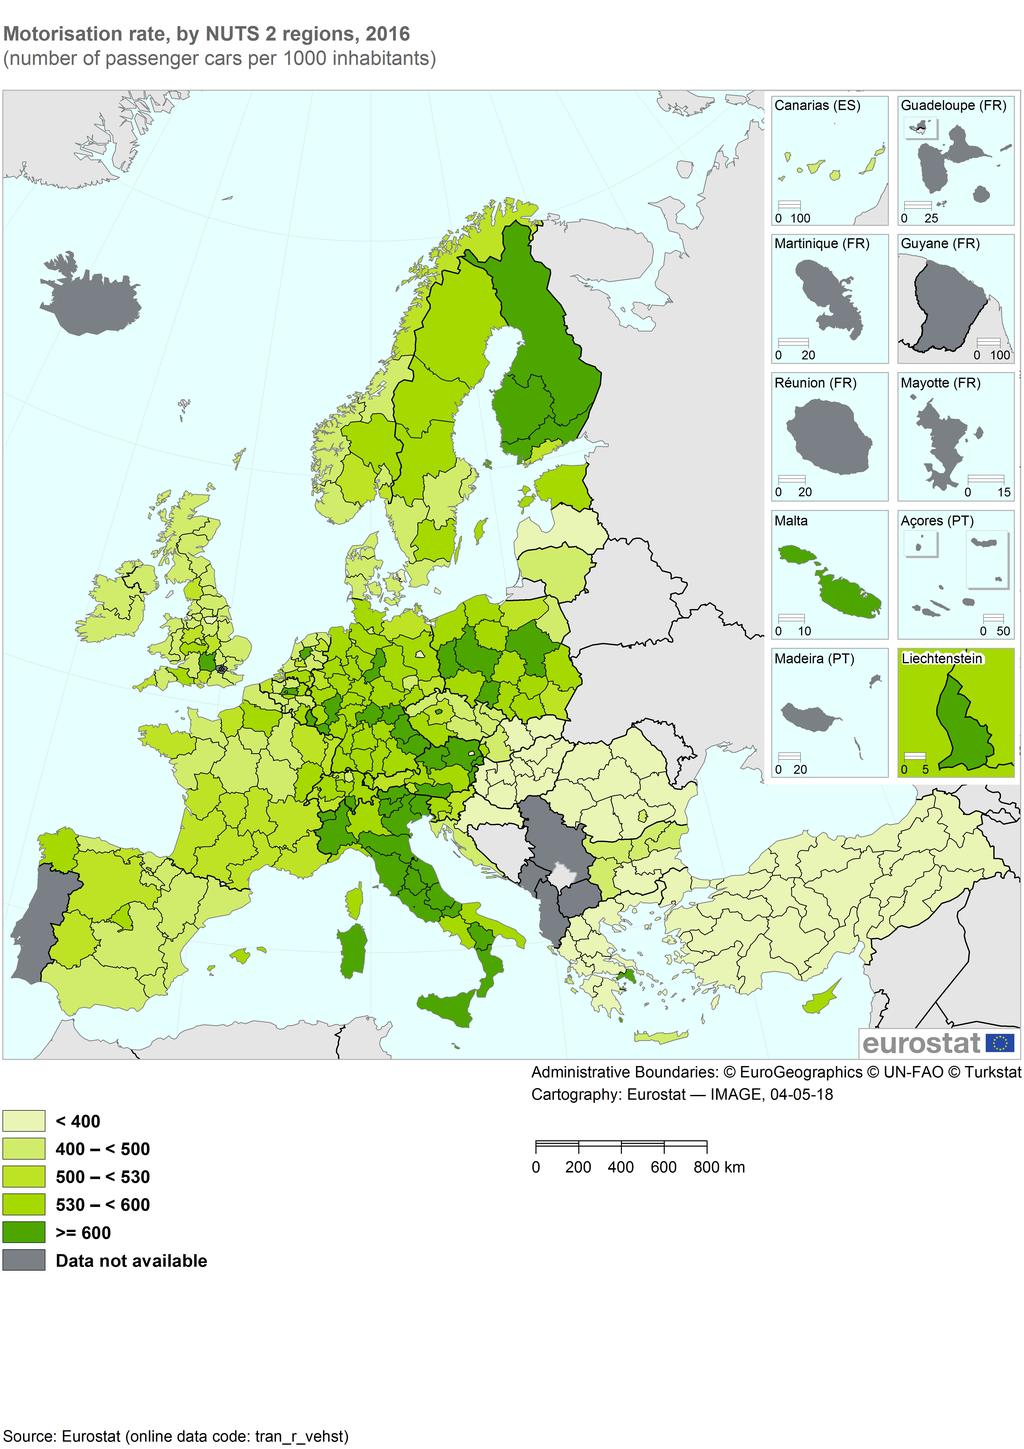 Map 1: Motorisation rate, by NUTS 2 region, 2016 - Source: Eurostat (tranrvehst) Noticeable disparities are, however, clearly observable for some specific countries on Map 1.